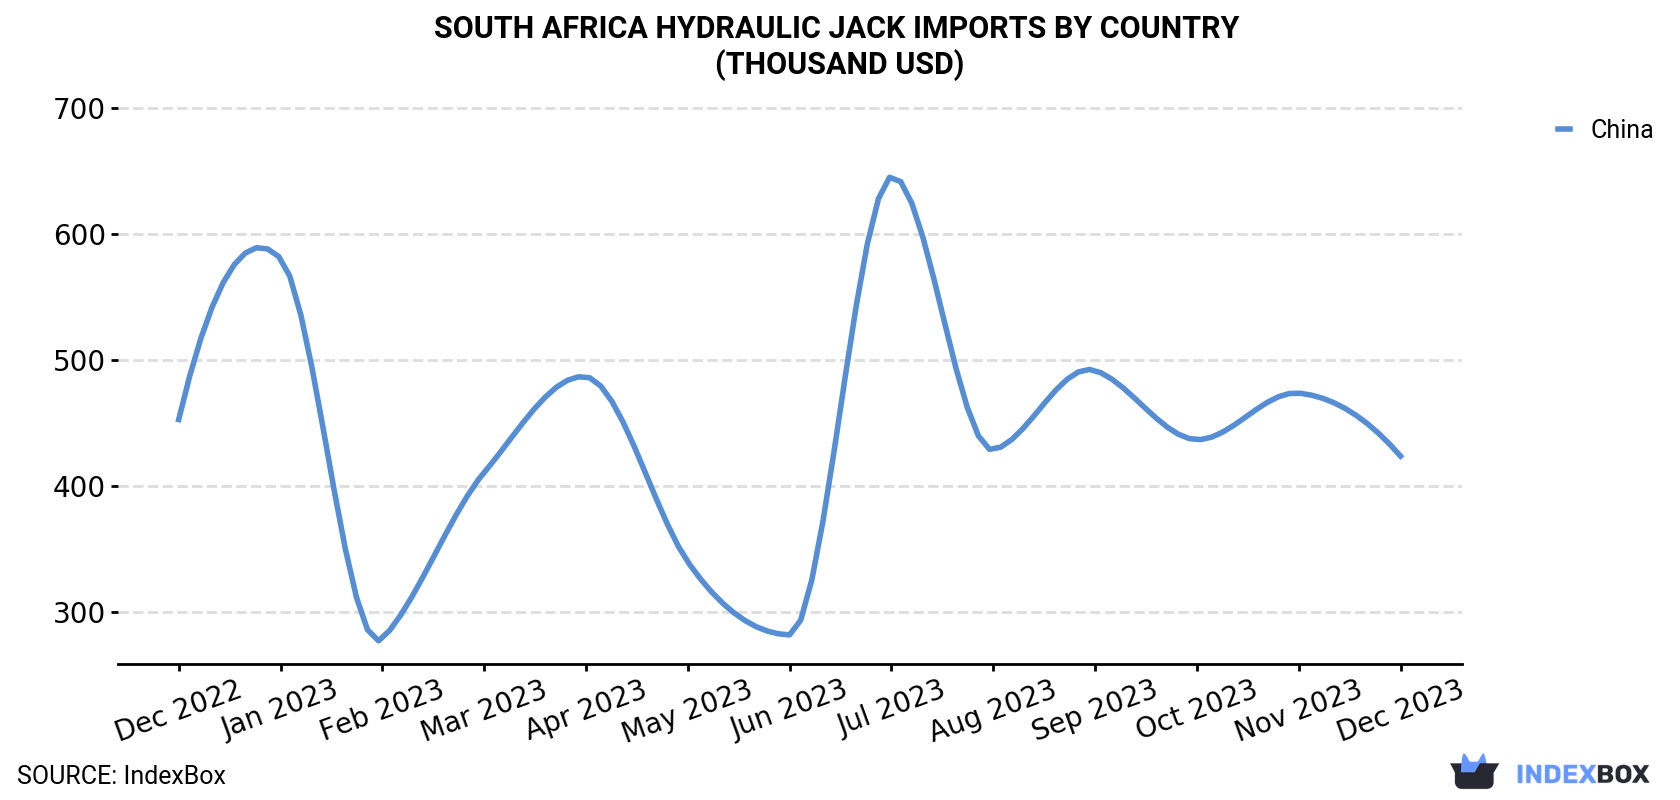 South Africa Hydraulic Jack Imports By Country (Thousand USD)